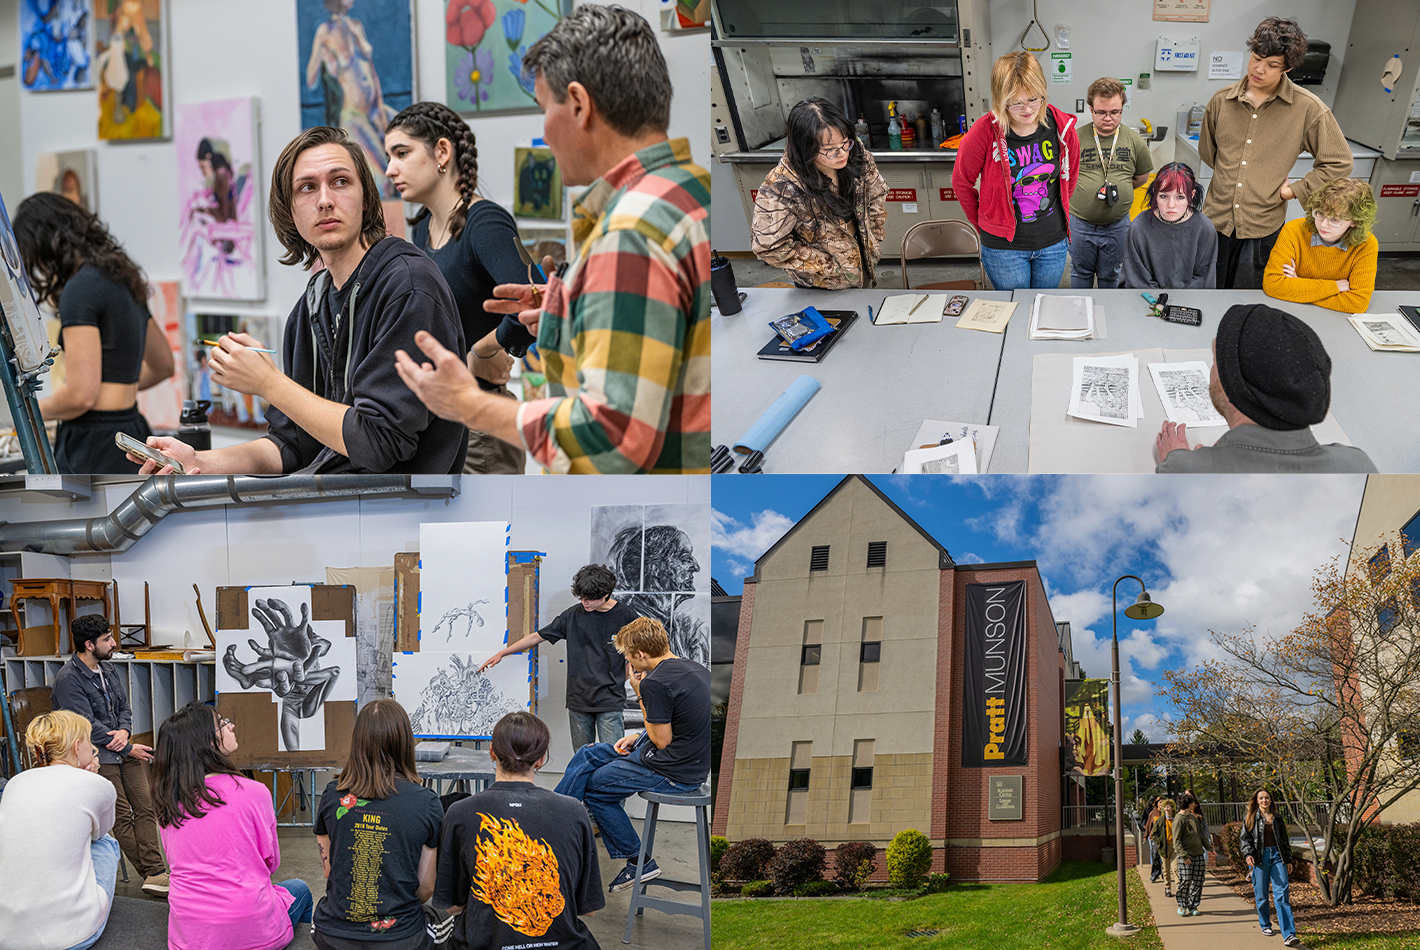 collage of images of students and artwork, critiquing, and campus